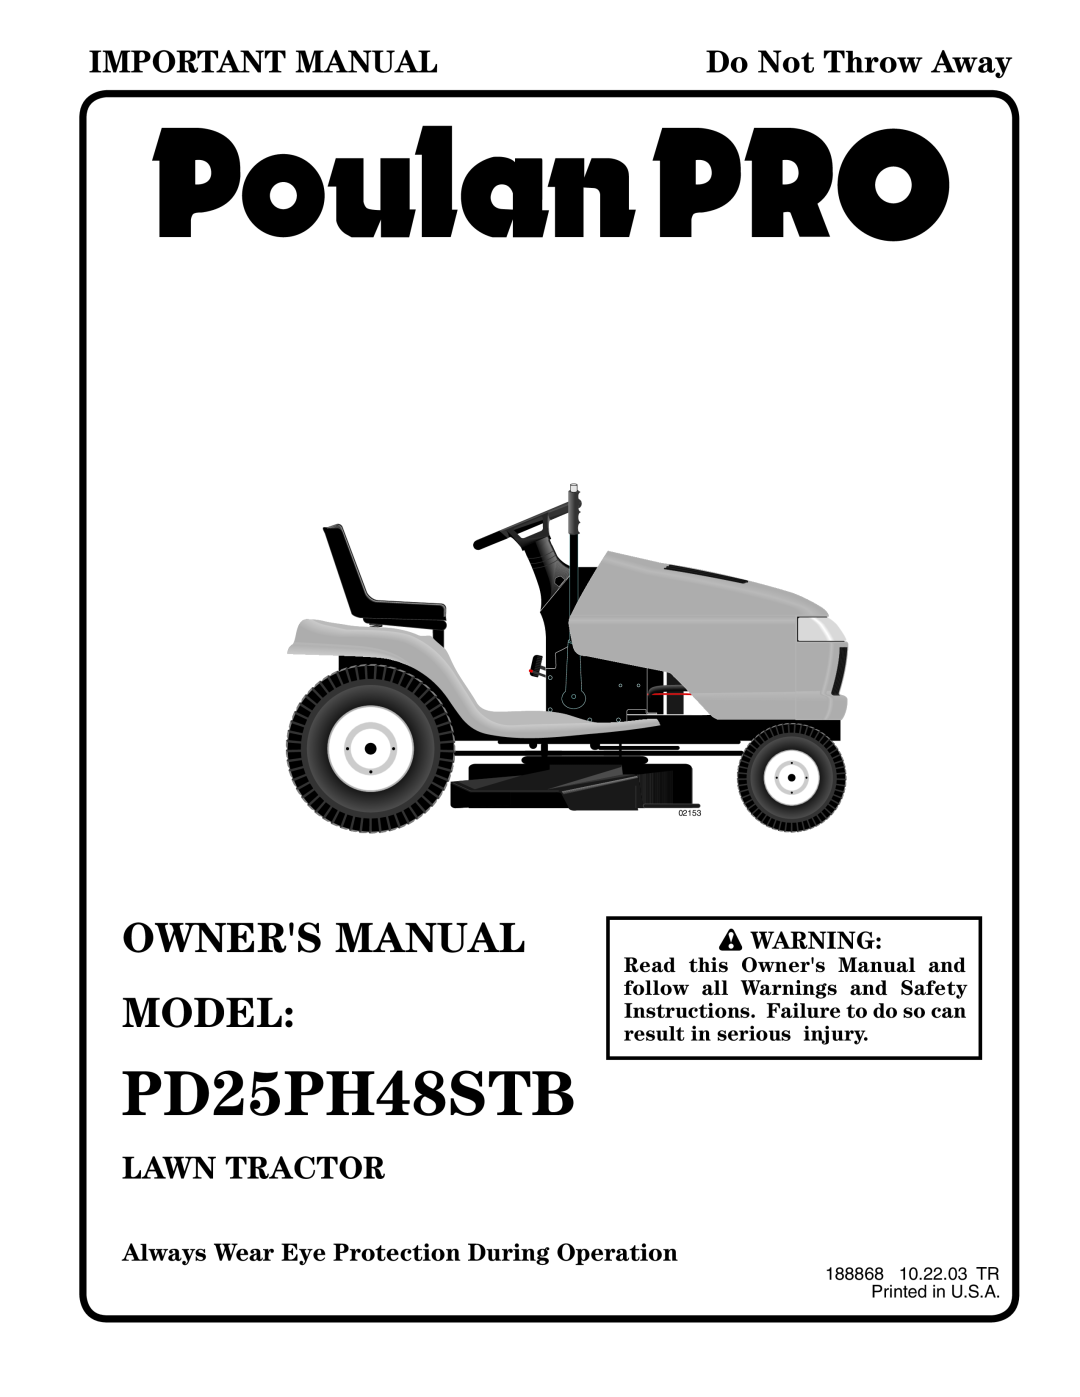 Poulan PD25PH48STB owner manual Owners Manual Model, Always Wear Eye Protection During Operation, Important Manual, 02153 